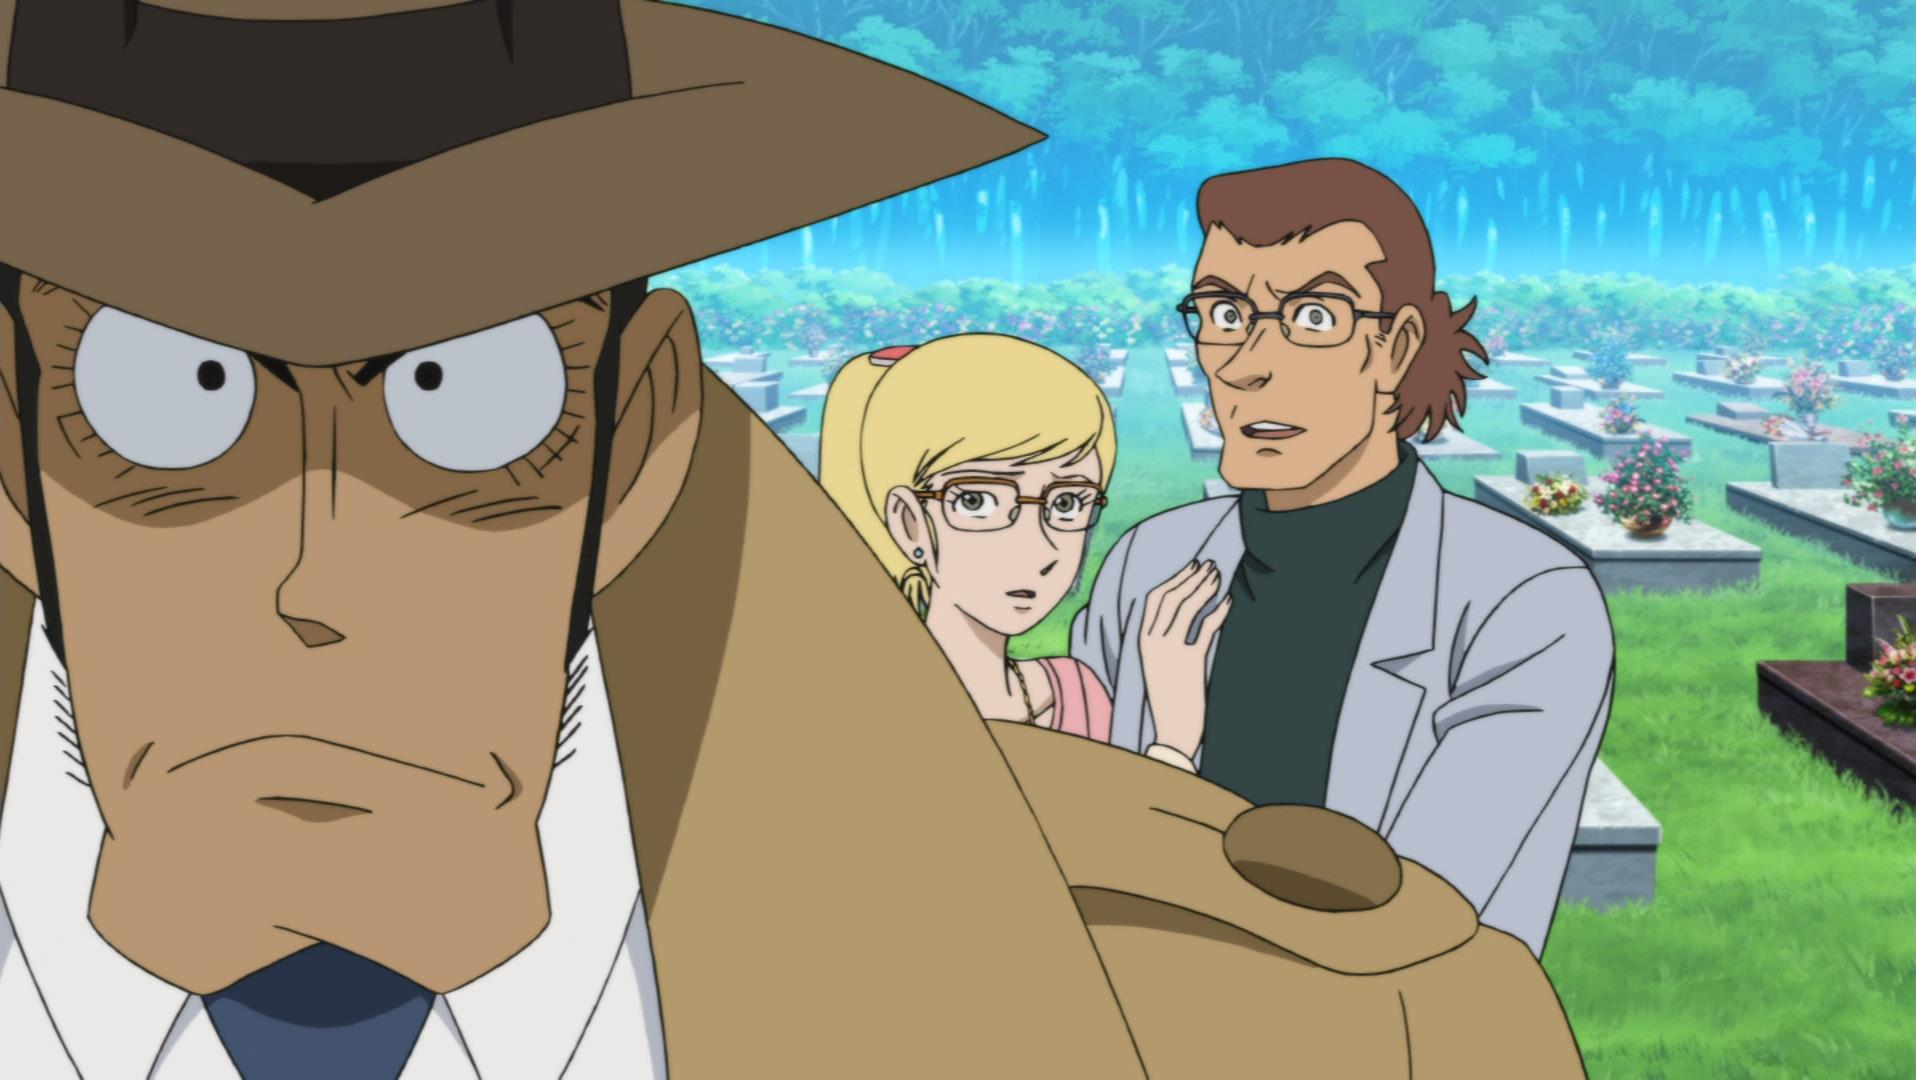 landlord Enumerate Gentleman friendly Lupin III: Travels of Marco Polo - Another Page (TV Special) Review -  AstroNerdBoy's Anime & Manga Blog | AstroNerdBoy's Anime & Manga Blog